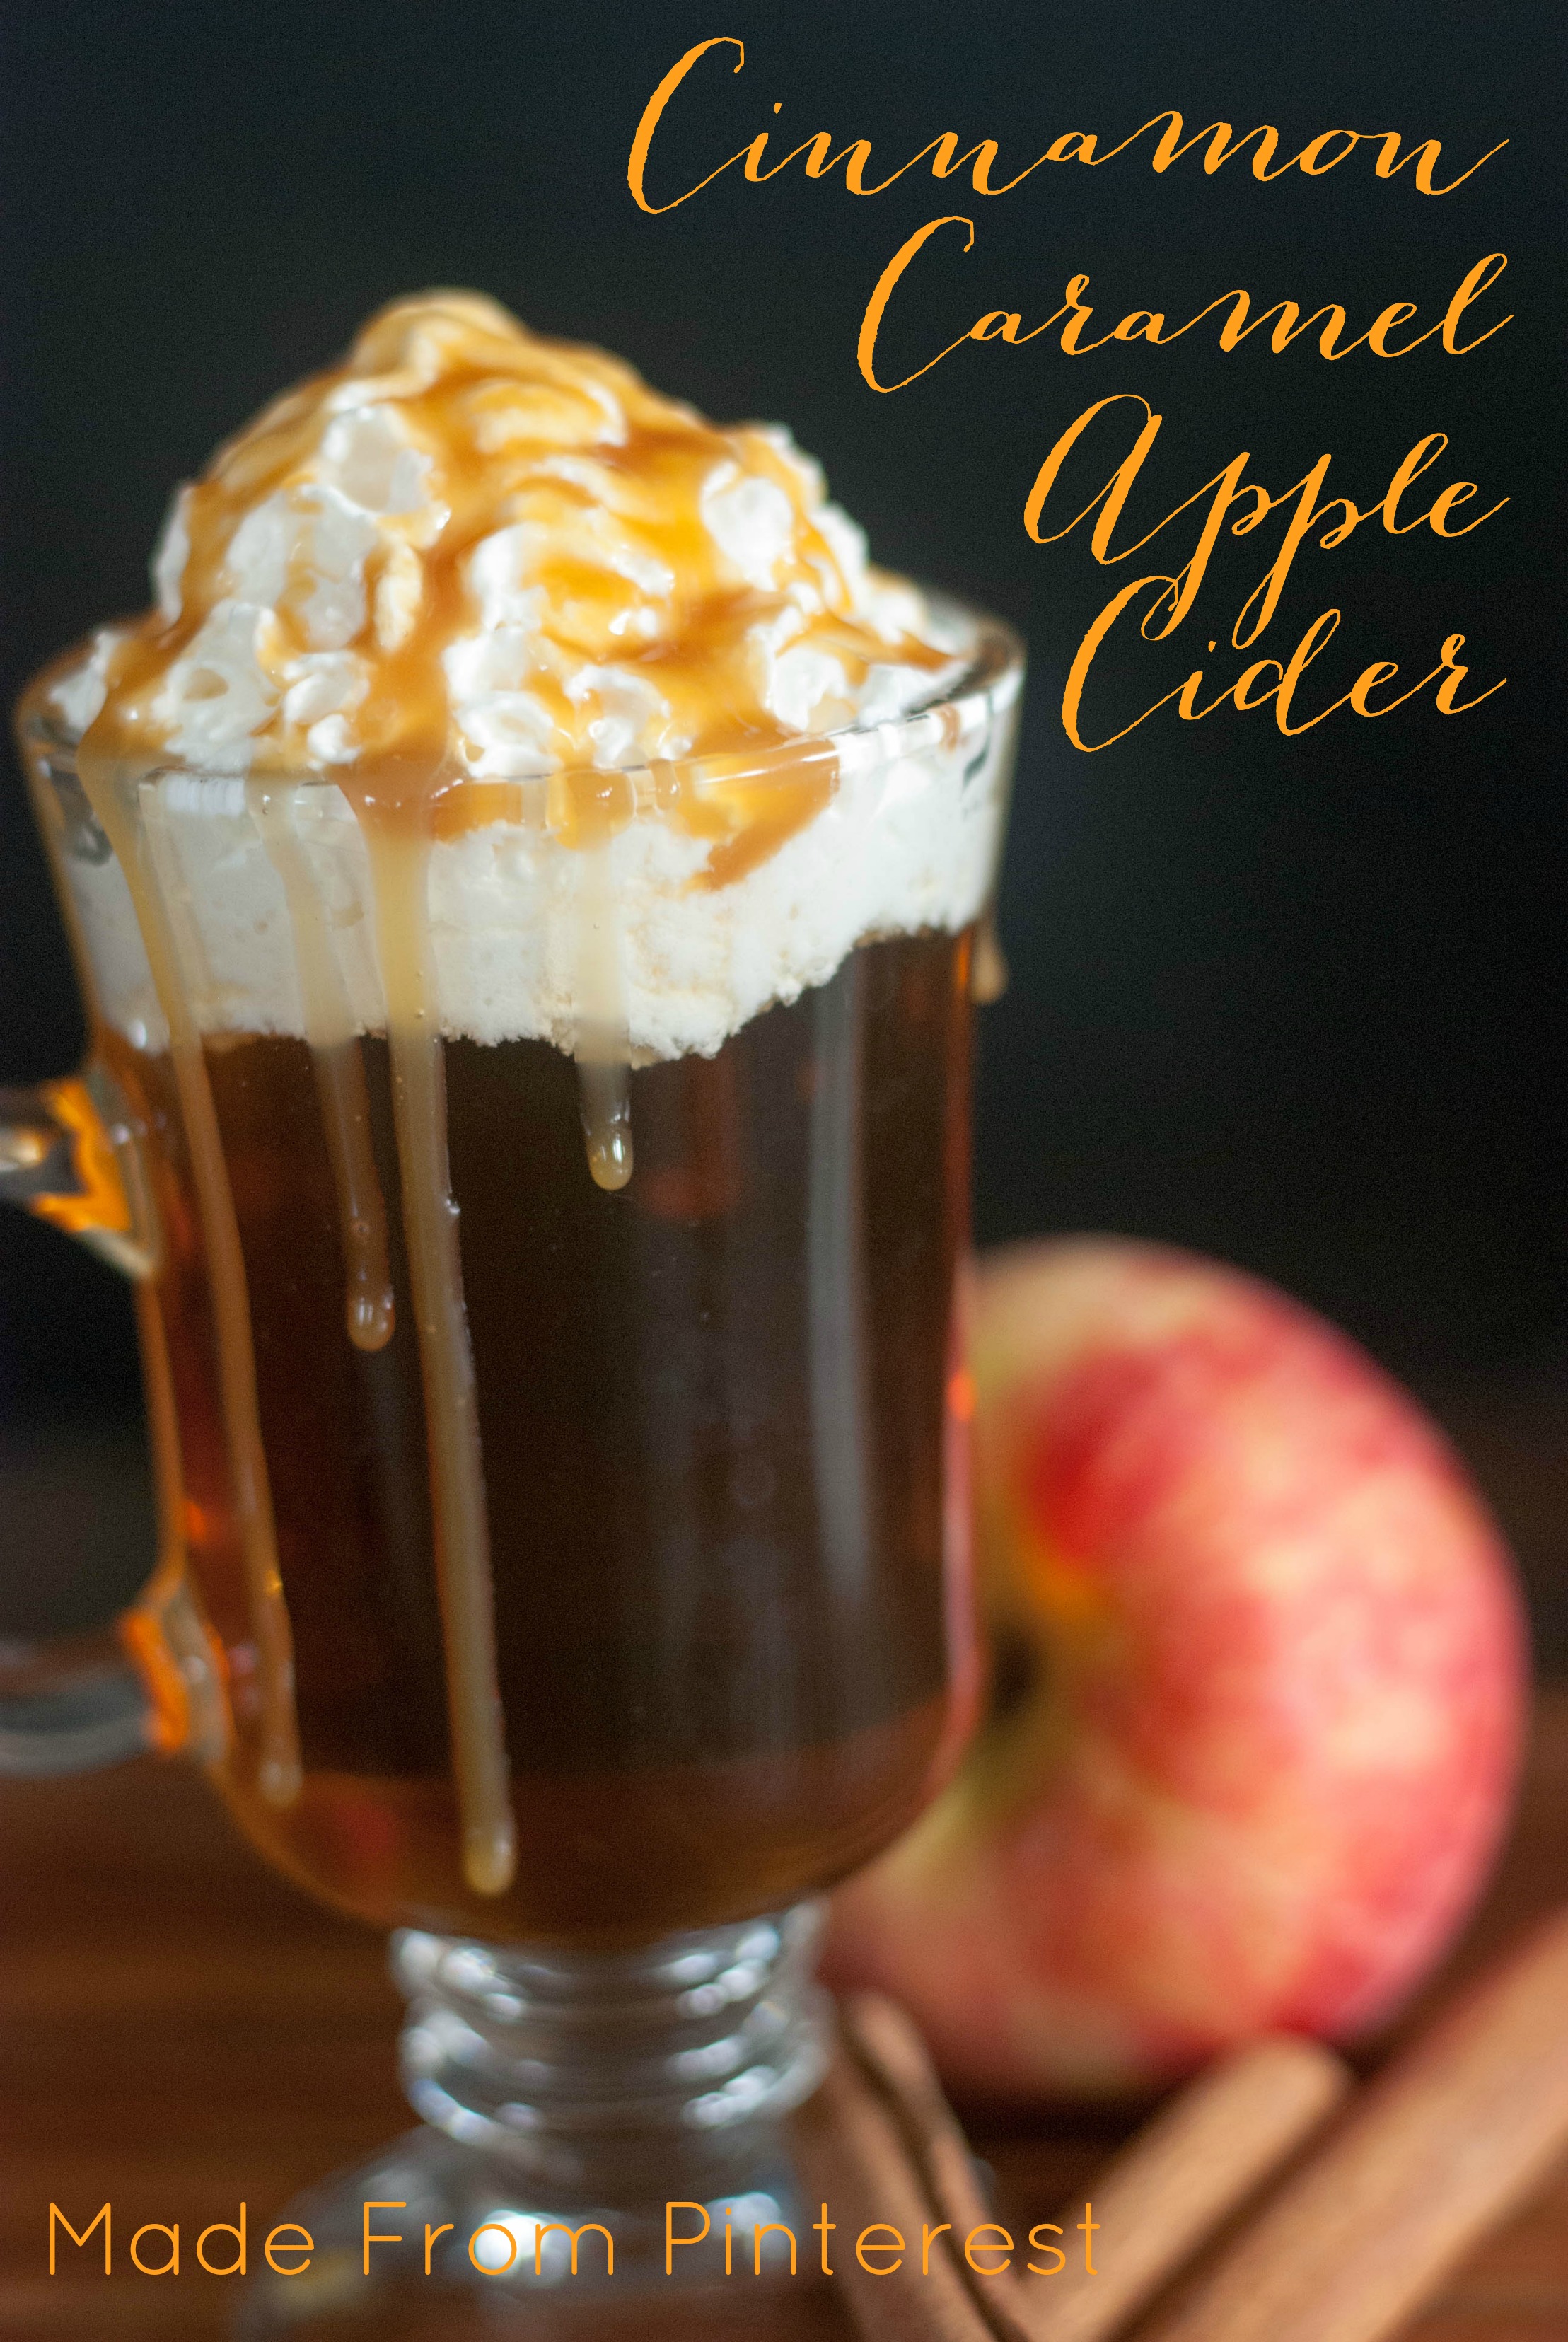 http://www.madefrompinterest.net/wp-content/uploads/2014/12/Recipe-for-Hot-Apple-Cider-that-tastes-like-a-Cinnamony-Caramel-Apple.-You-wont-believe-this.jpg